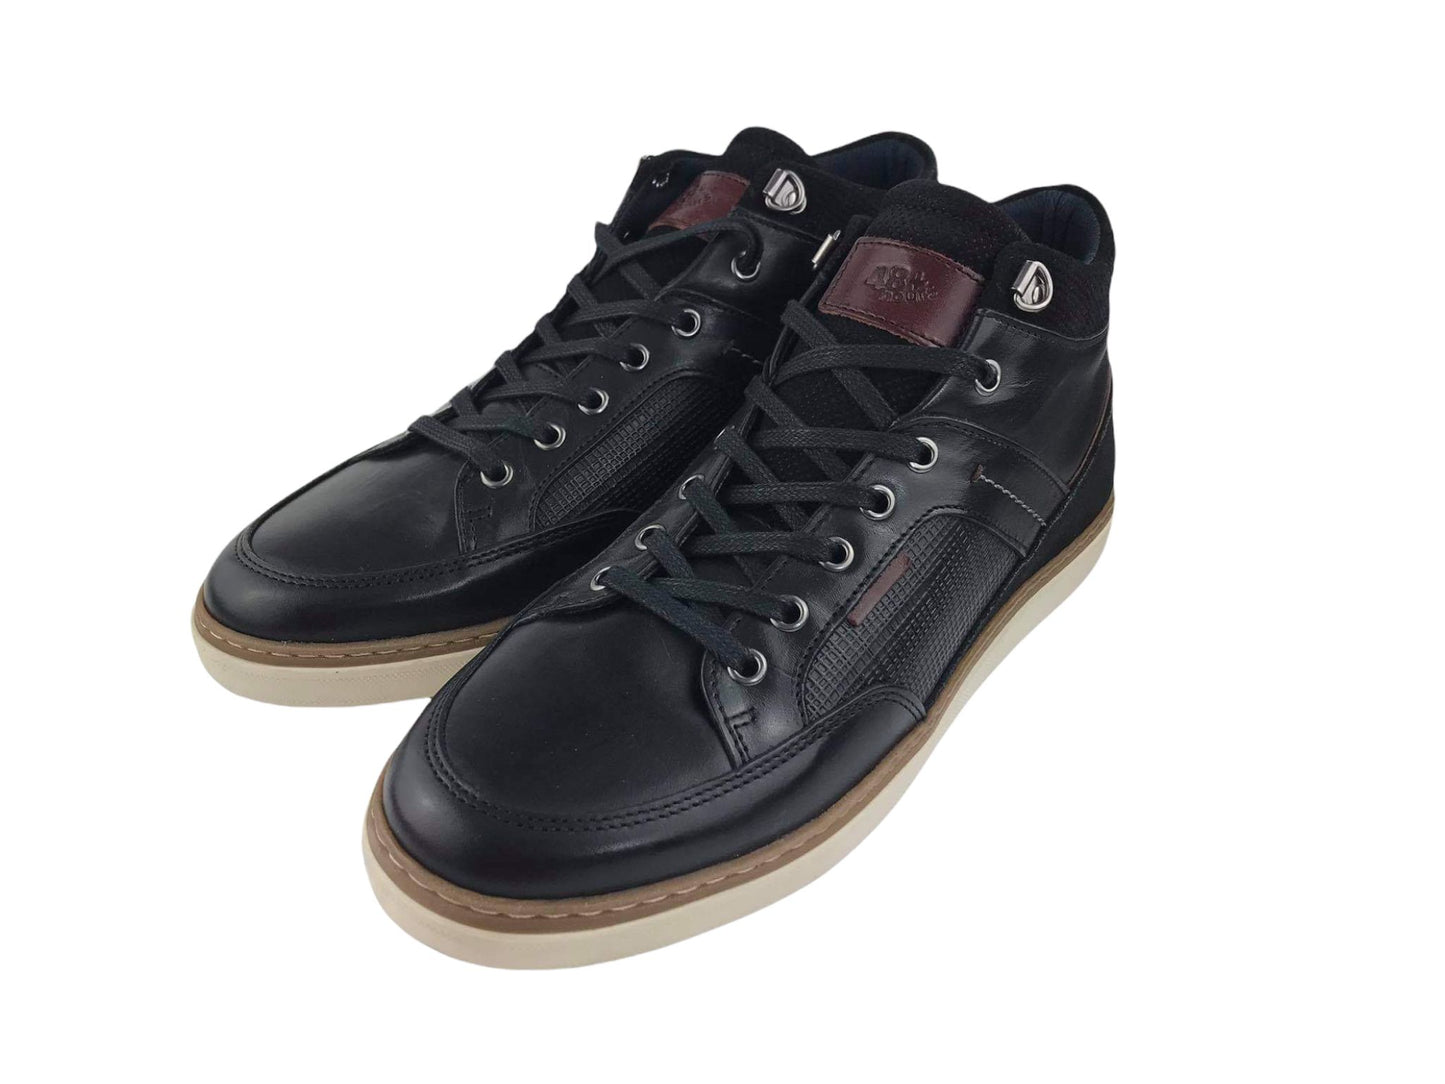 48Hours | Men's ankle boots with zipper and laces in various skins Singapore